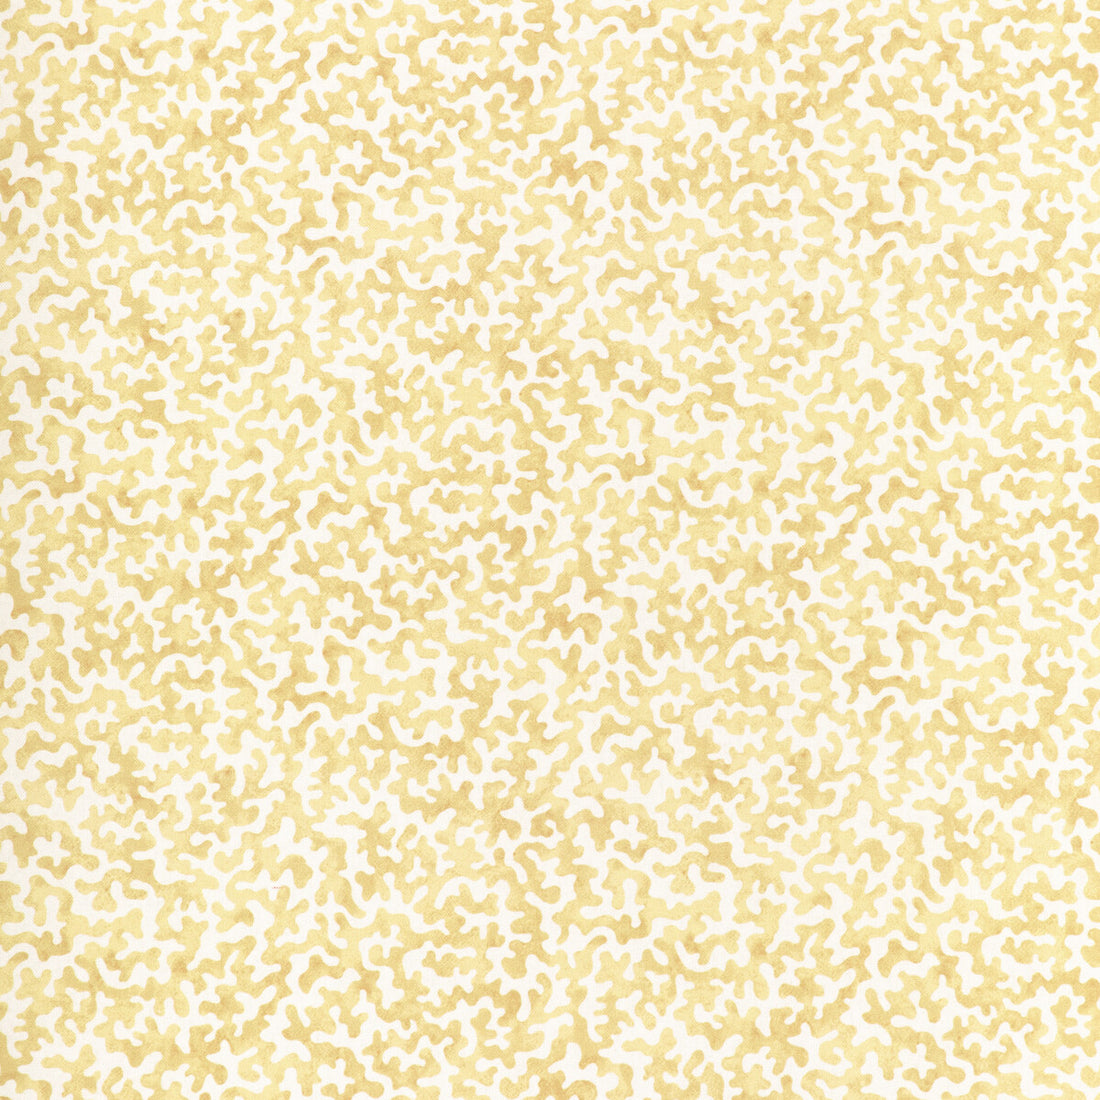 Coralcoast fabric in cornsilk color - pattern CORALCOAST.14.0 - by Kravet Basics in the Small Scale Prints collection